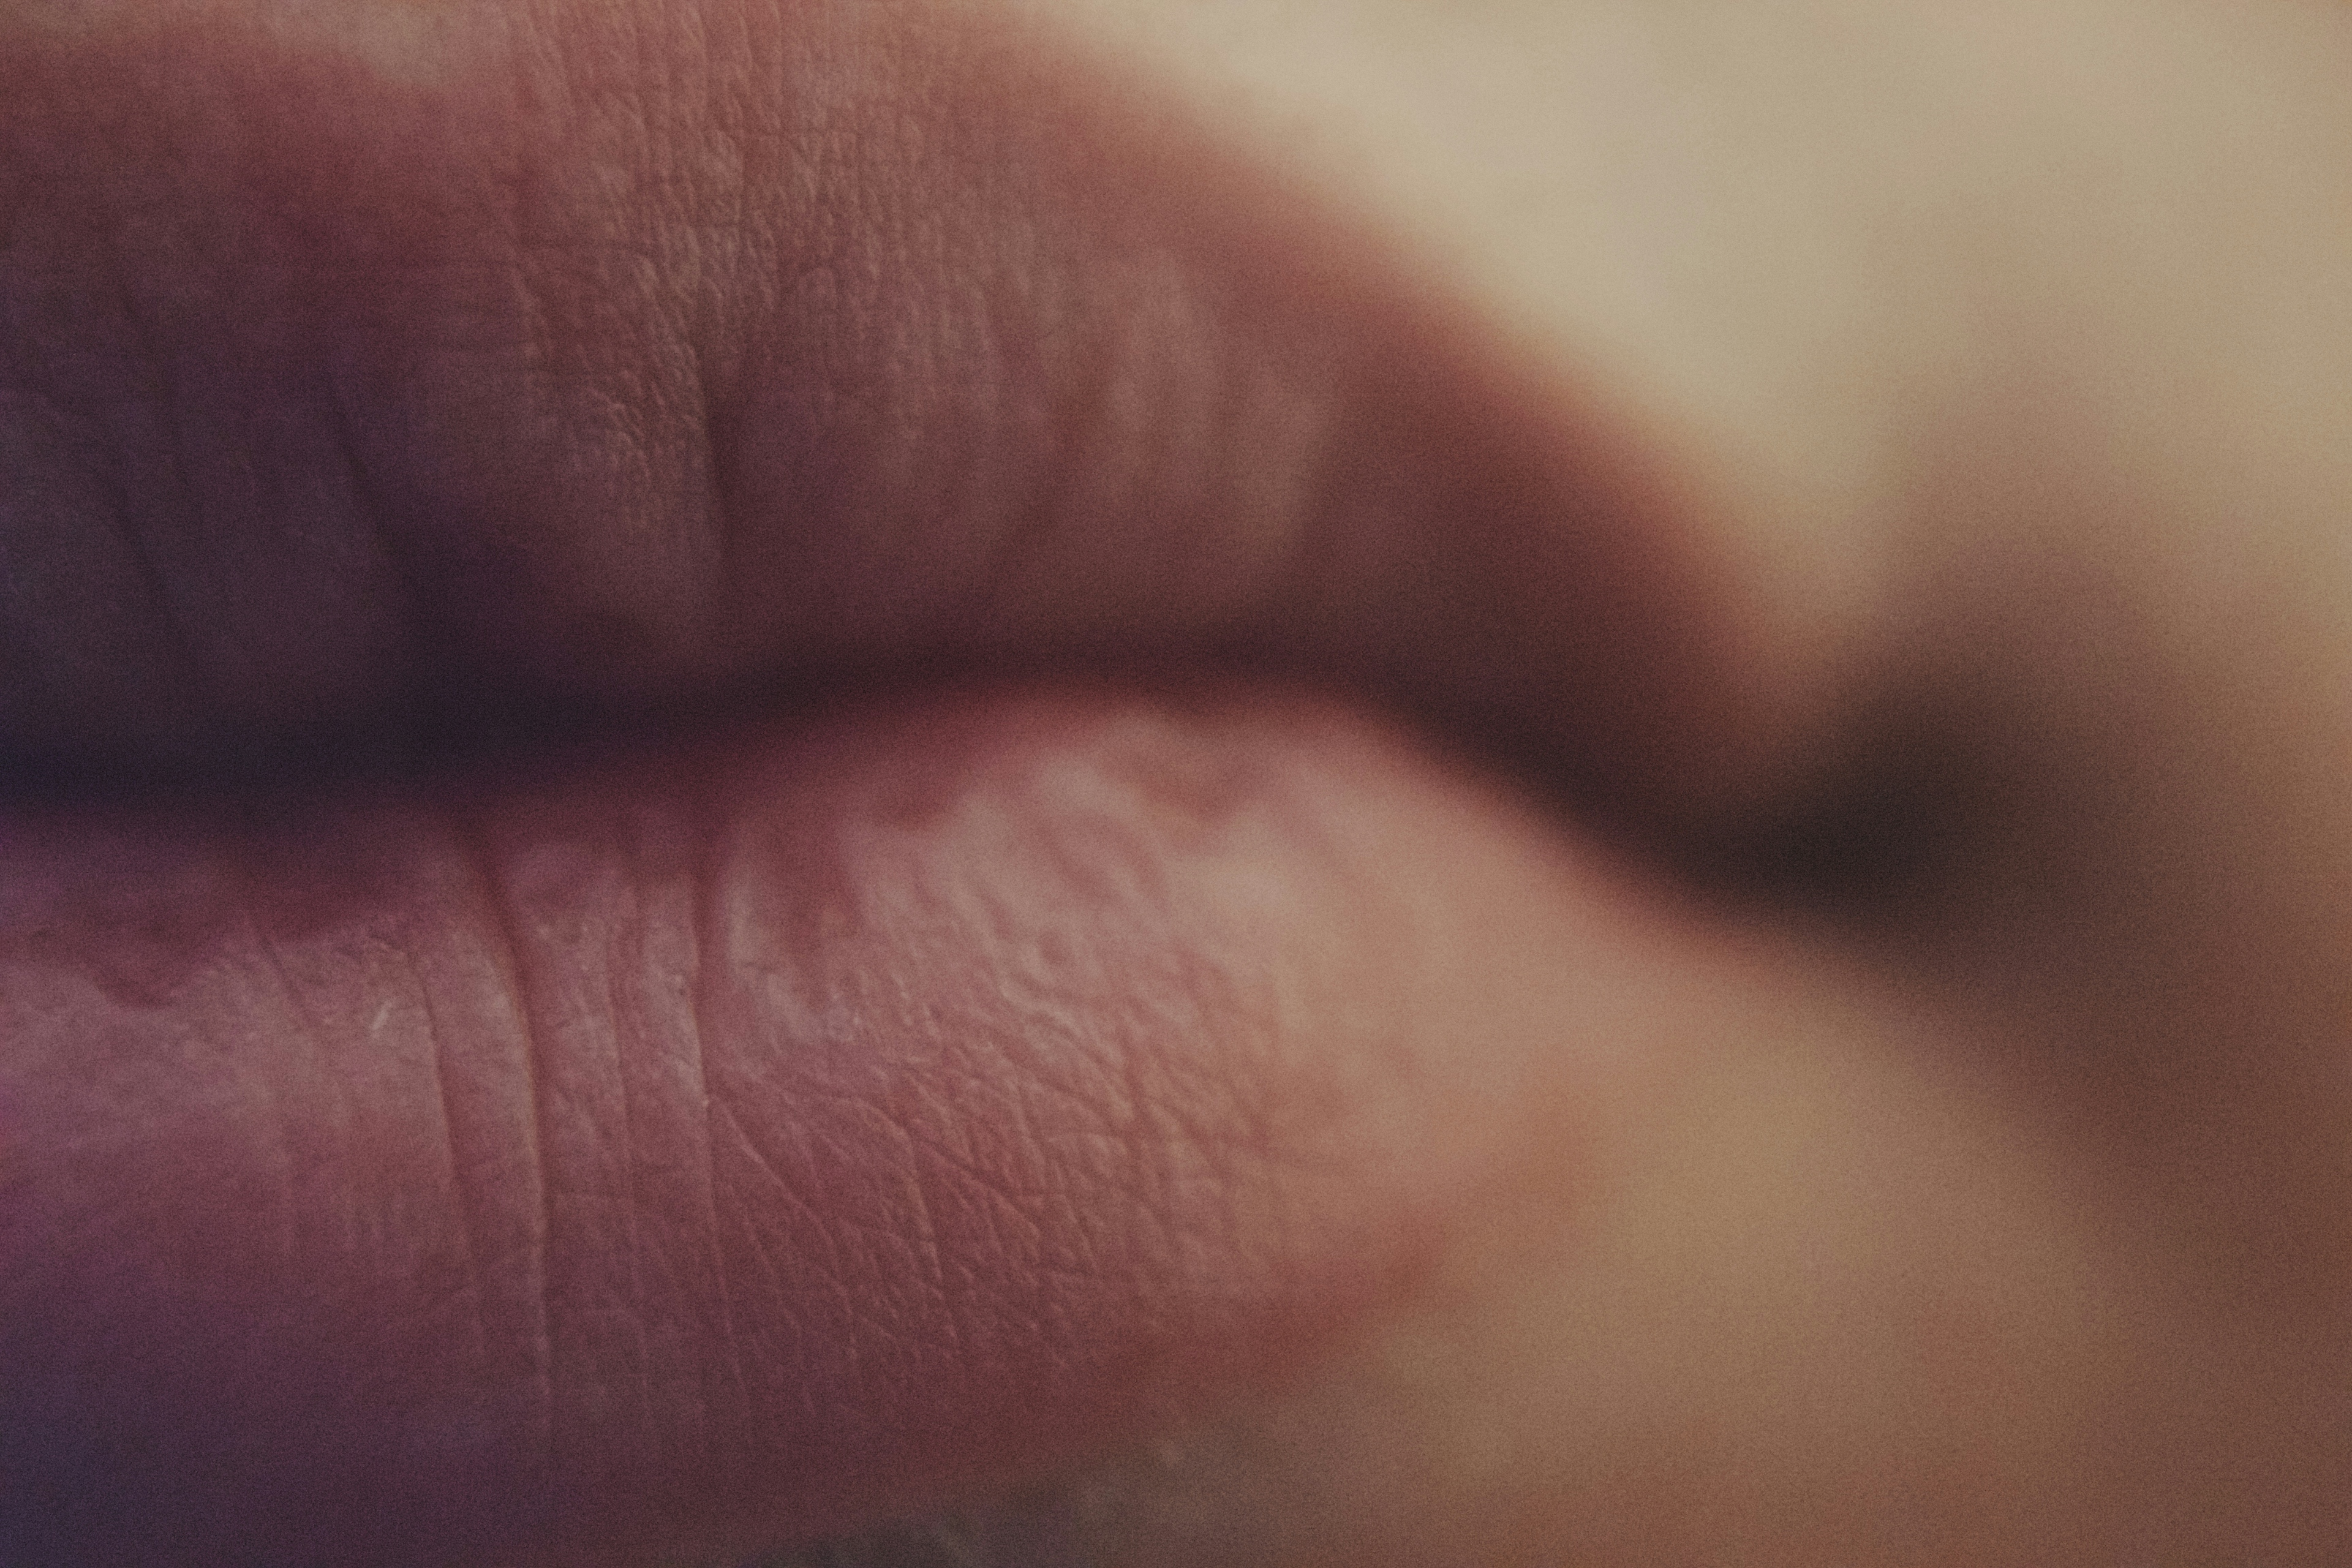 A macro photo of a pair of lips.